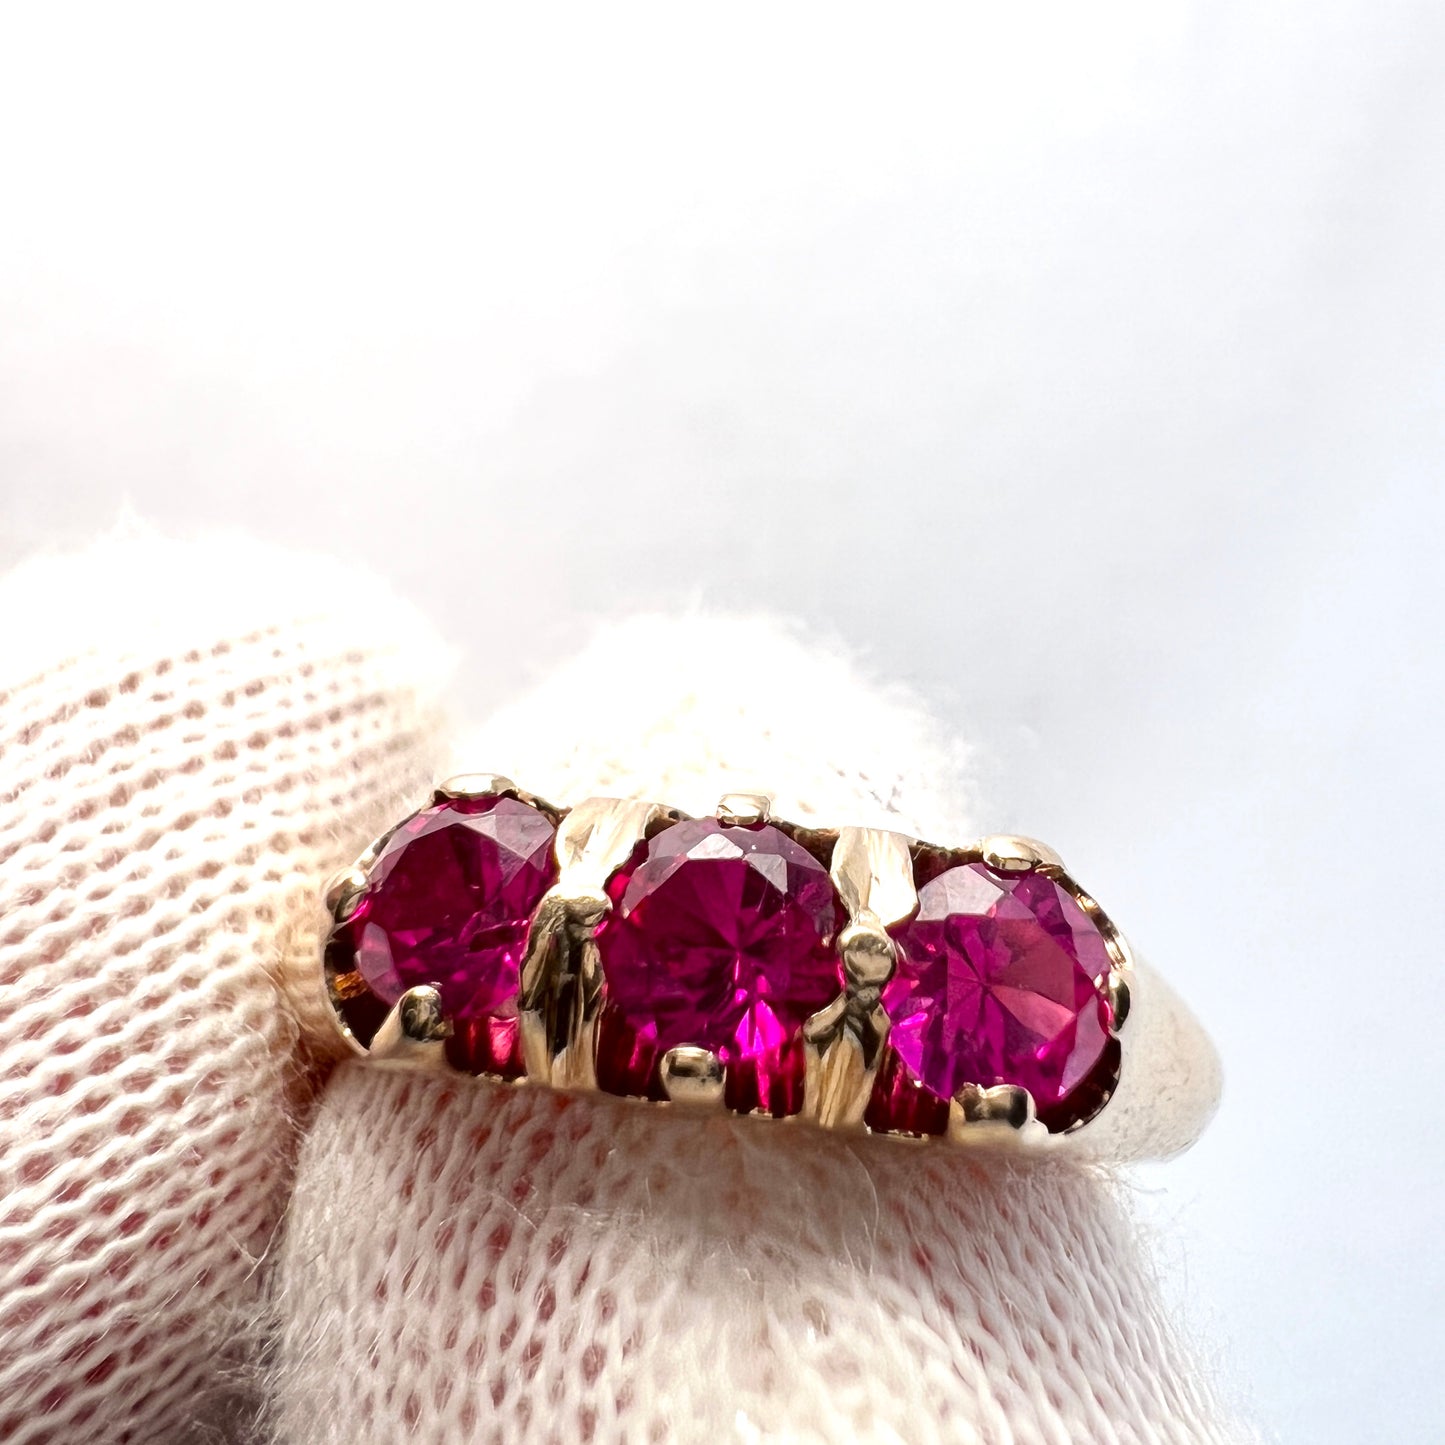 N Westerback, Finland 1972. Vintage 14k Gold Synthetic Sapphire Ring.